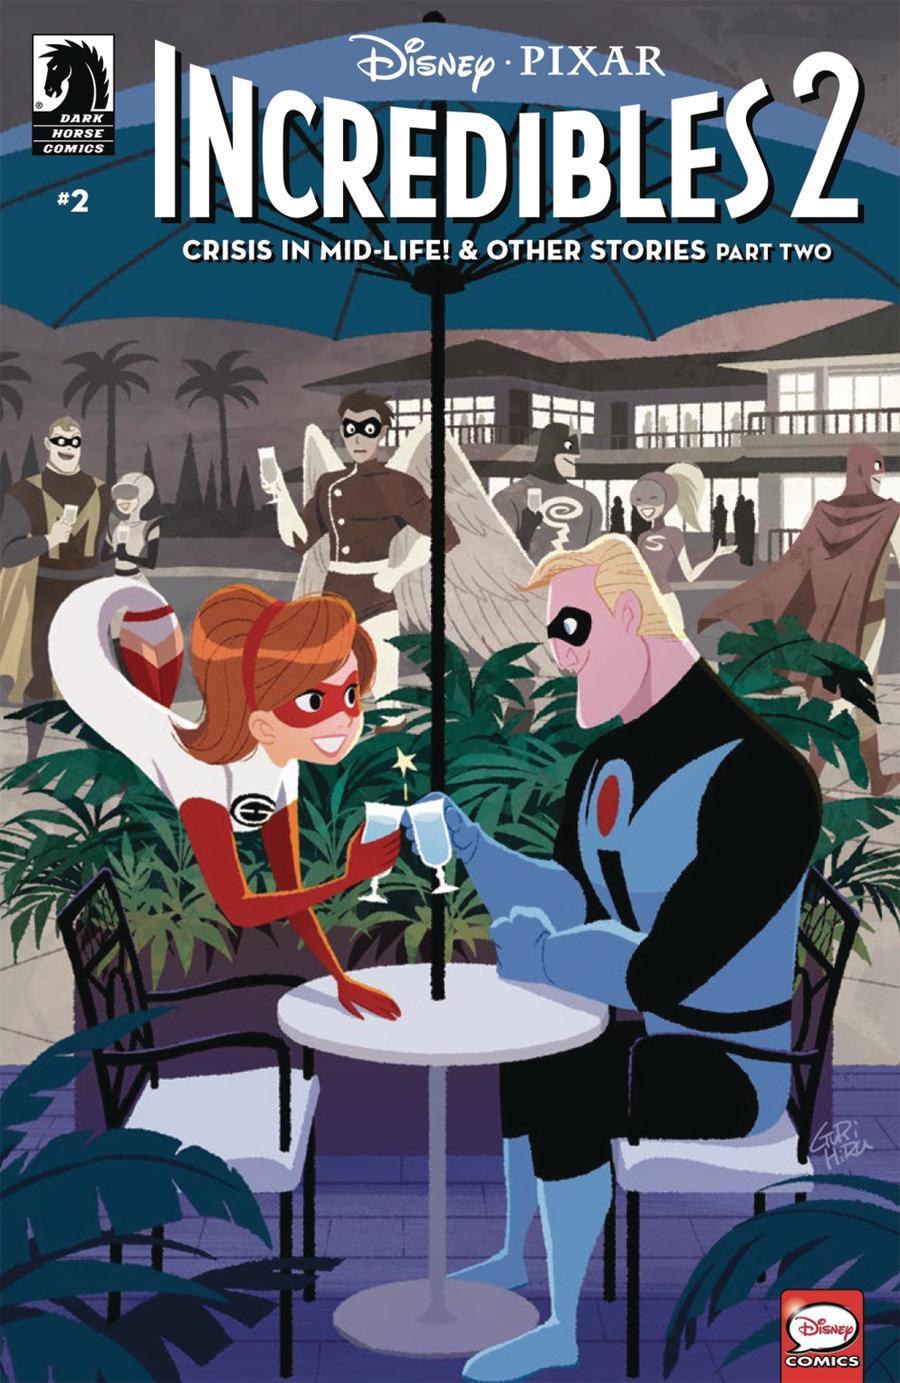 Disney Pixars Incredibles 2 Crisis In Mid-Life & Other Stories Vol. 1 #2